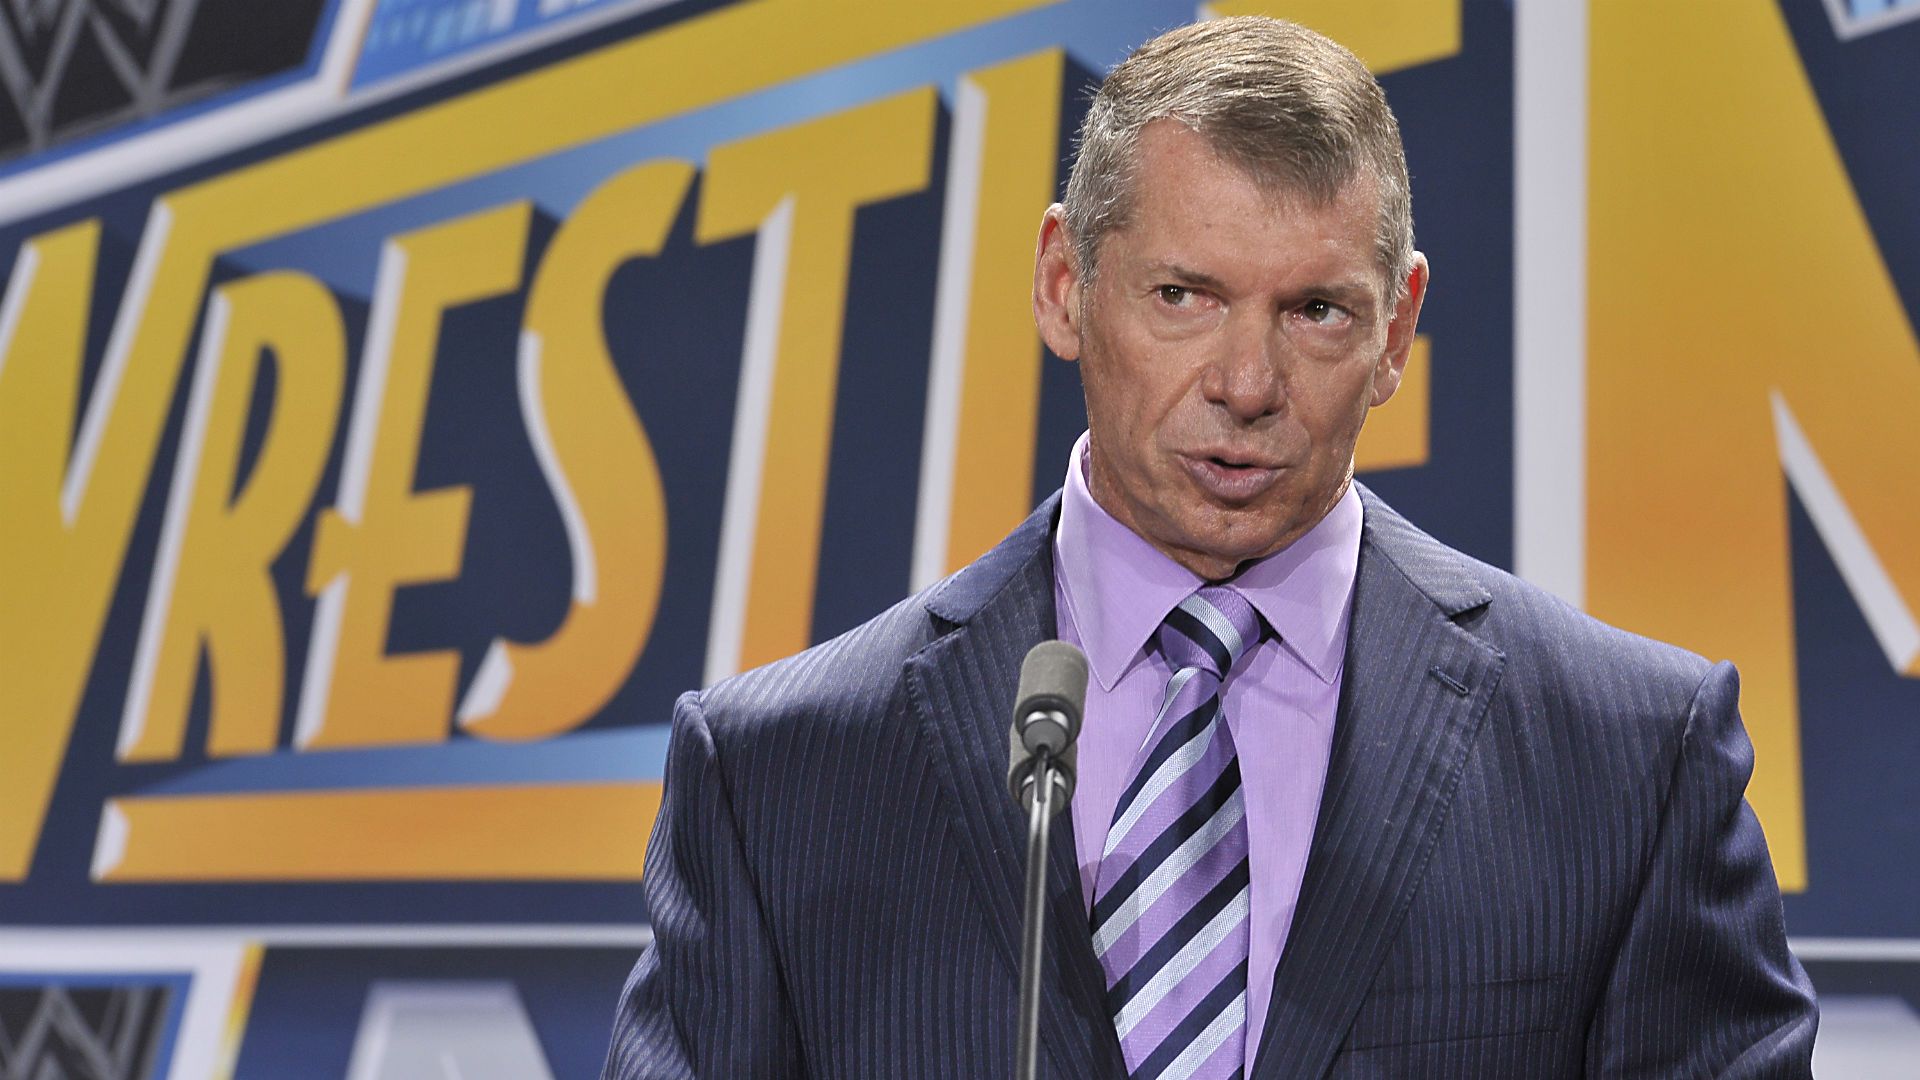 WWE and XFL fallout have put Vince McMahon in very precarious